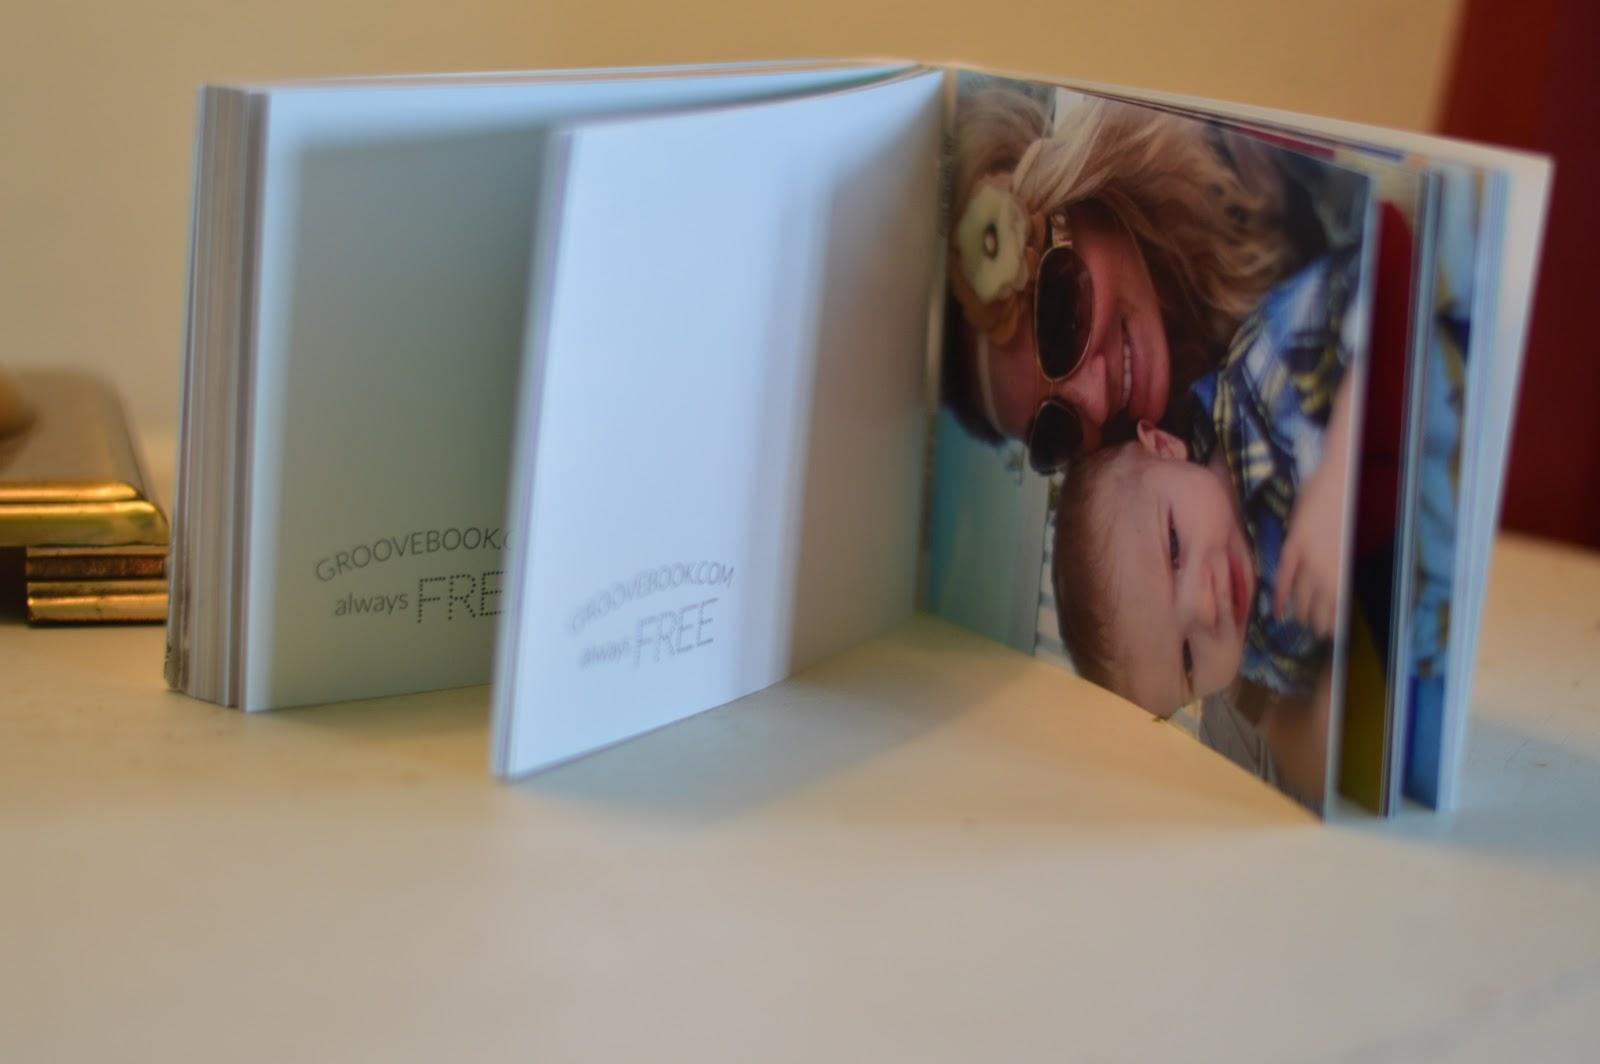 FREE photo book for YOU! Thanks to GrooveBook :)